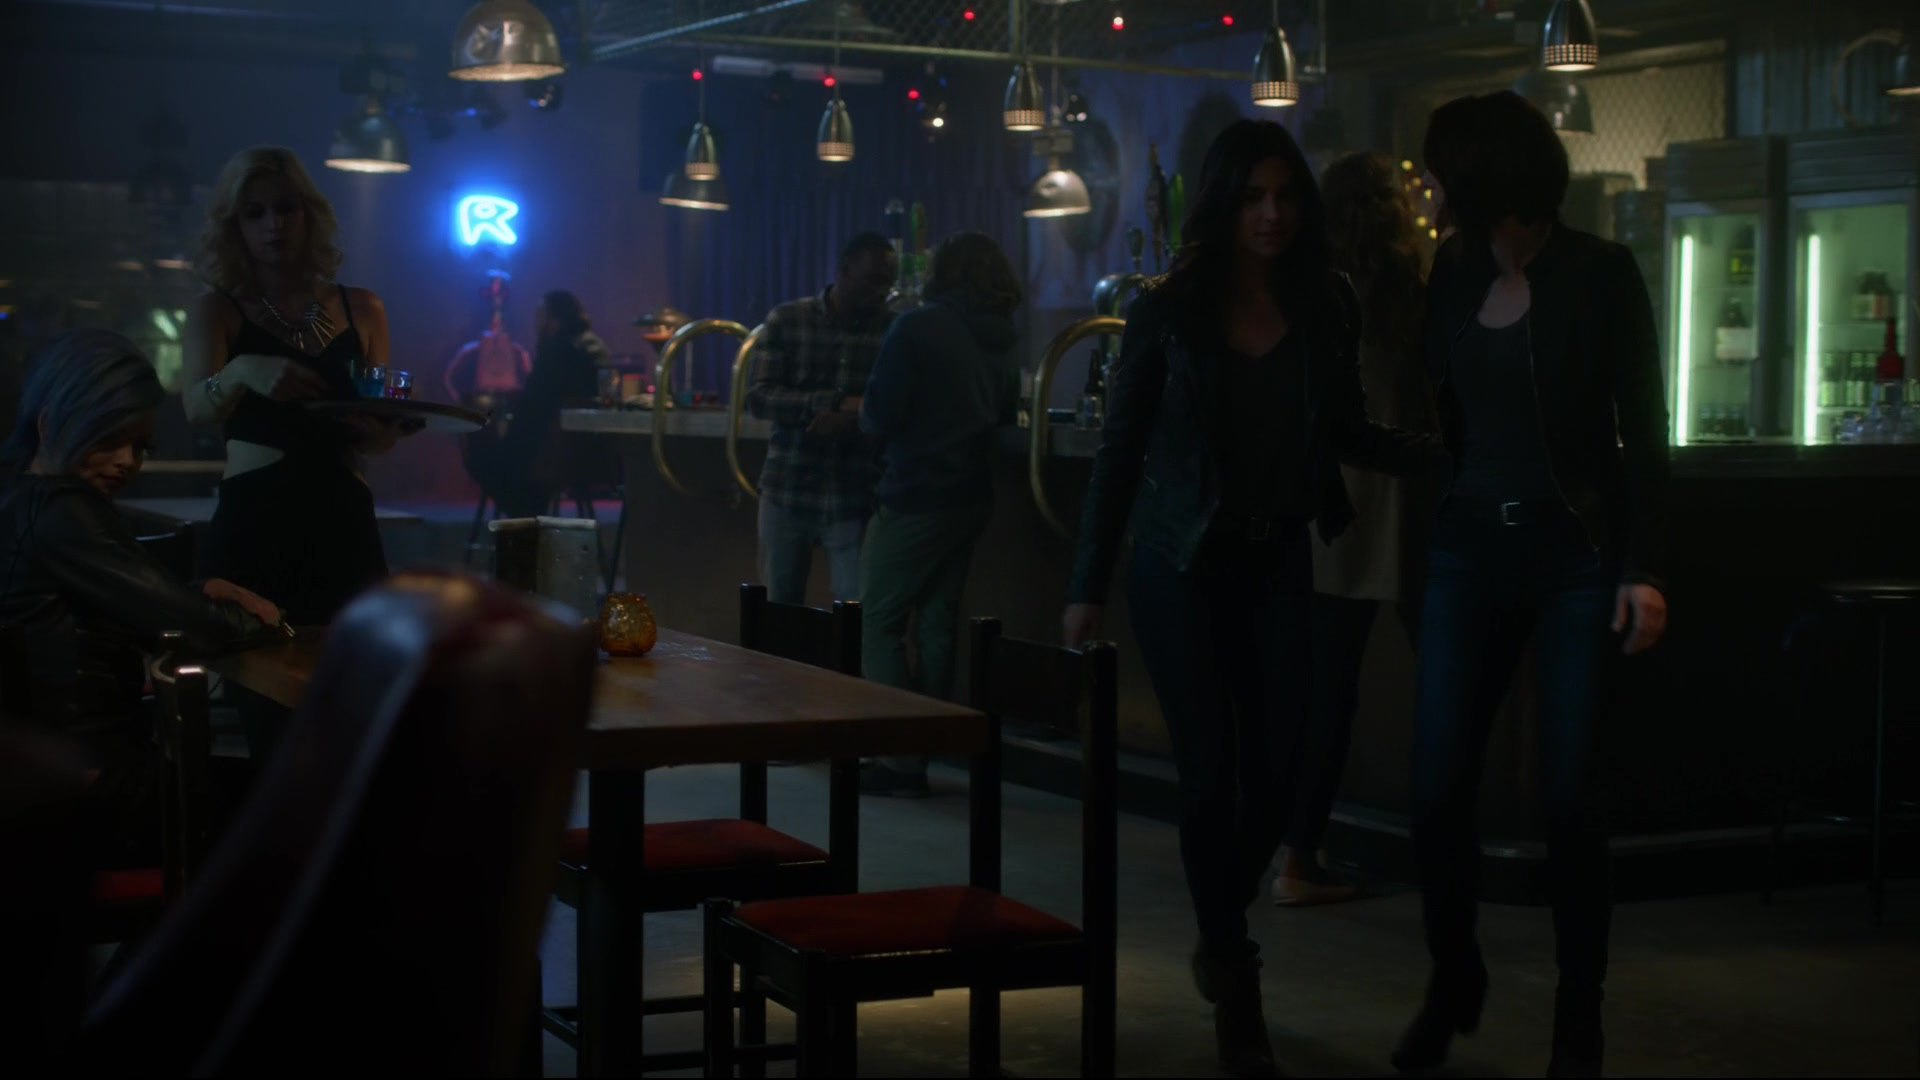 Supergirl's sister and her sister's girlfriend seem to be leaving a bar for aliens. 